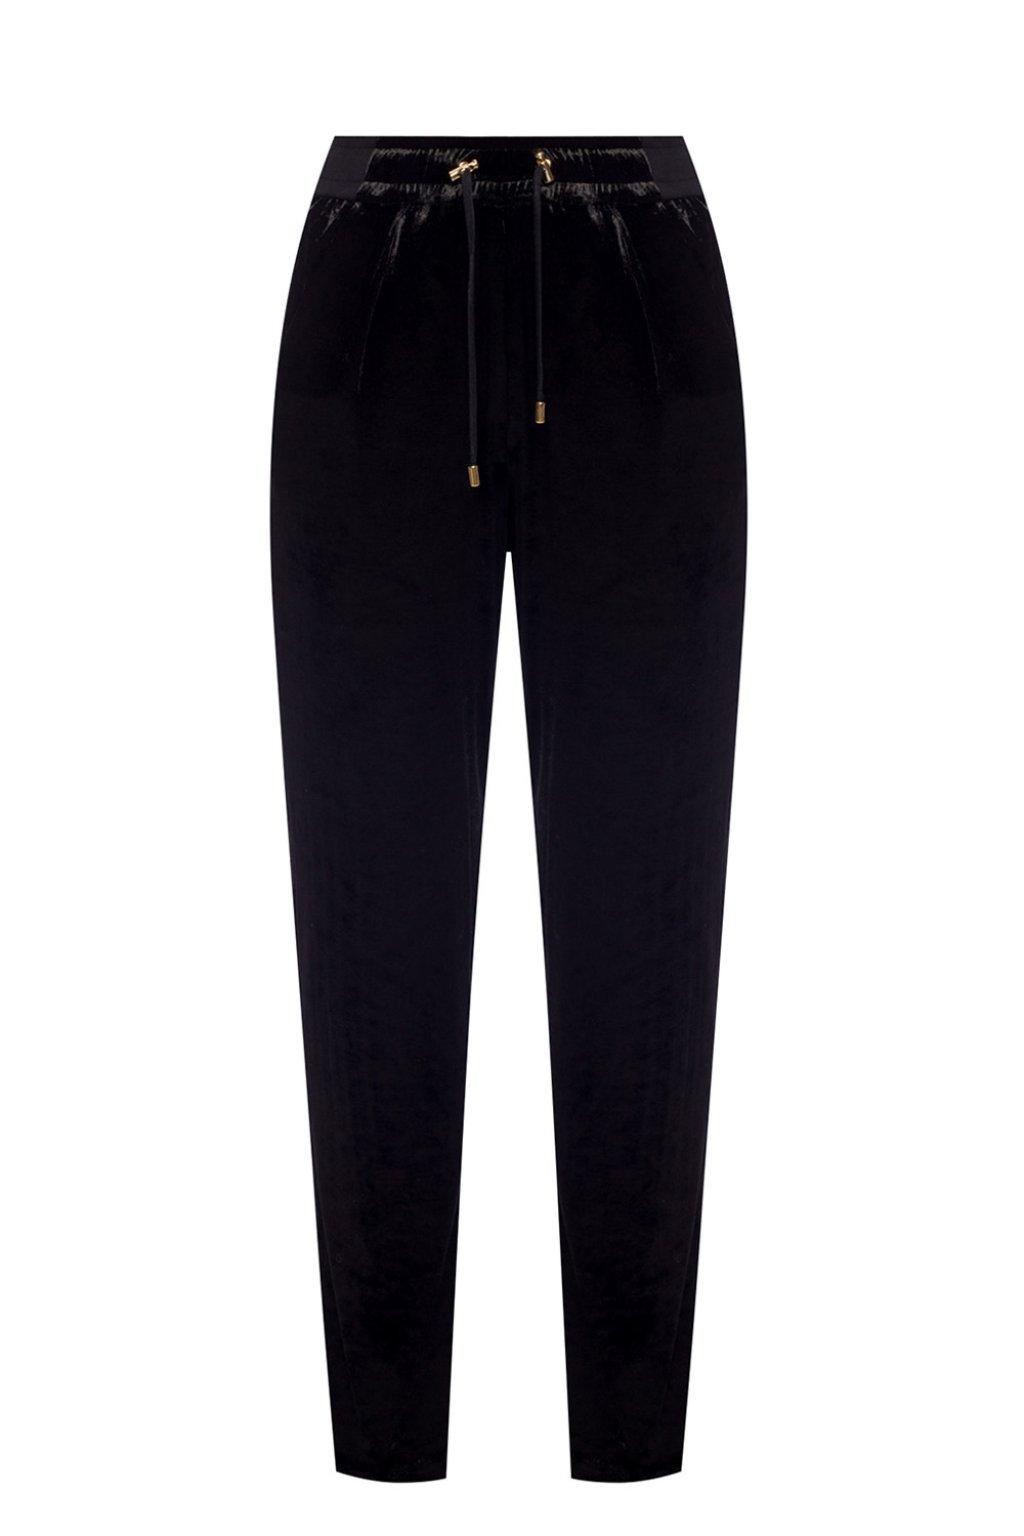 Balmain Synthetic Textured Sweatpants in Black Red (Black) - Lyst